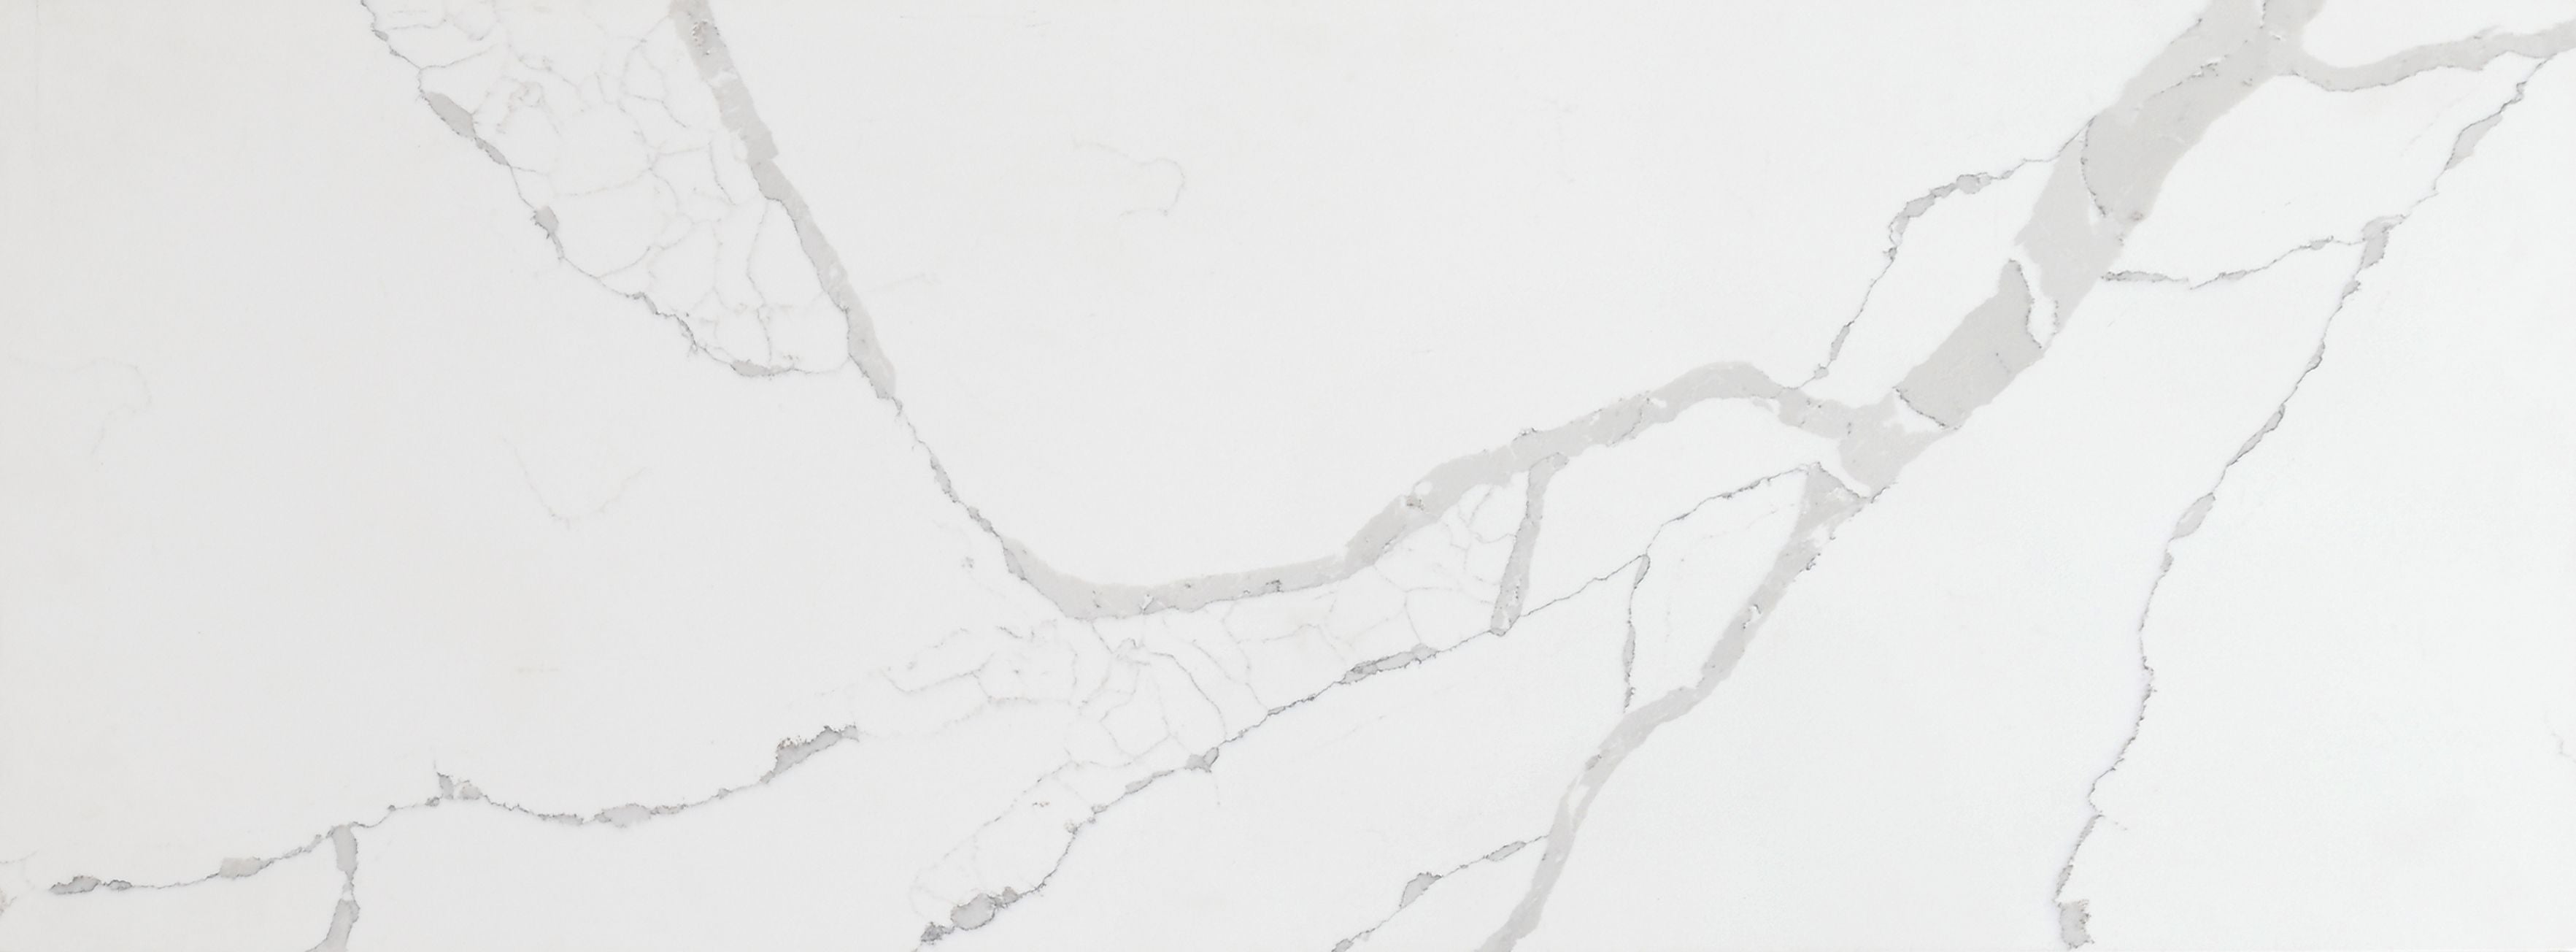 XENIA PALIS WHITE FLAT QUARTZ STONE TOP (AVAILABLE IN 600MM, 750MM, 900MM, 1200MM, 1500MM AND 1800MM)